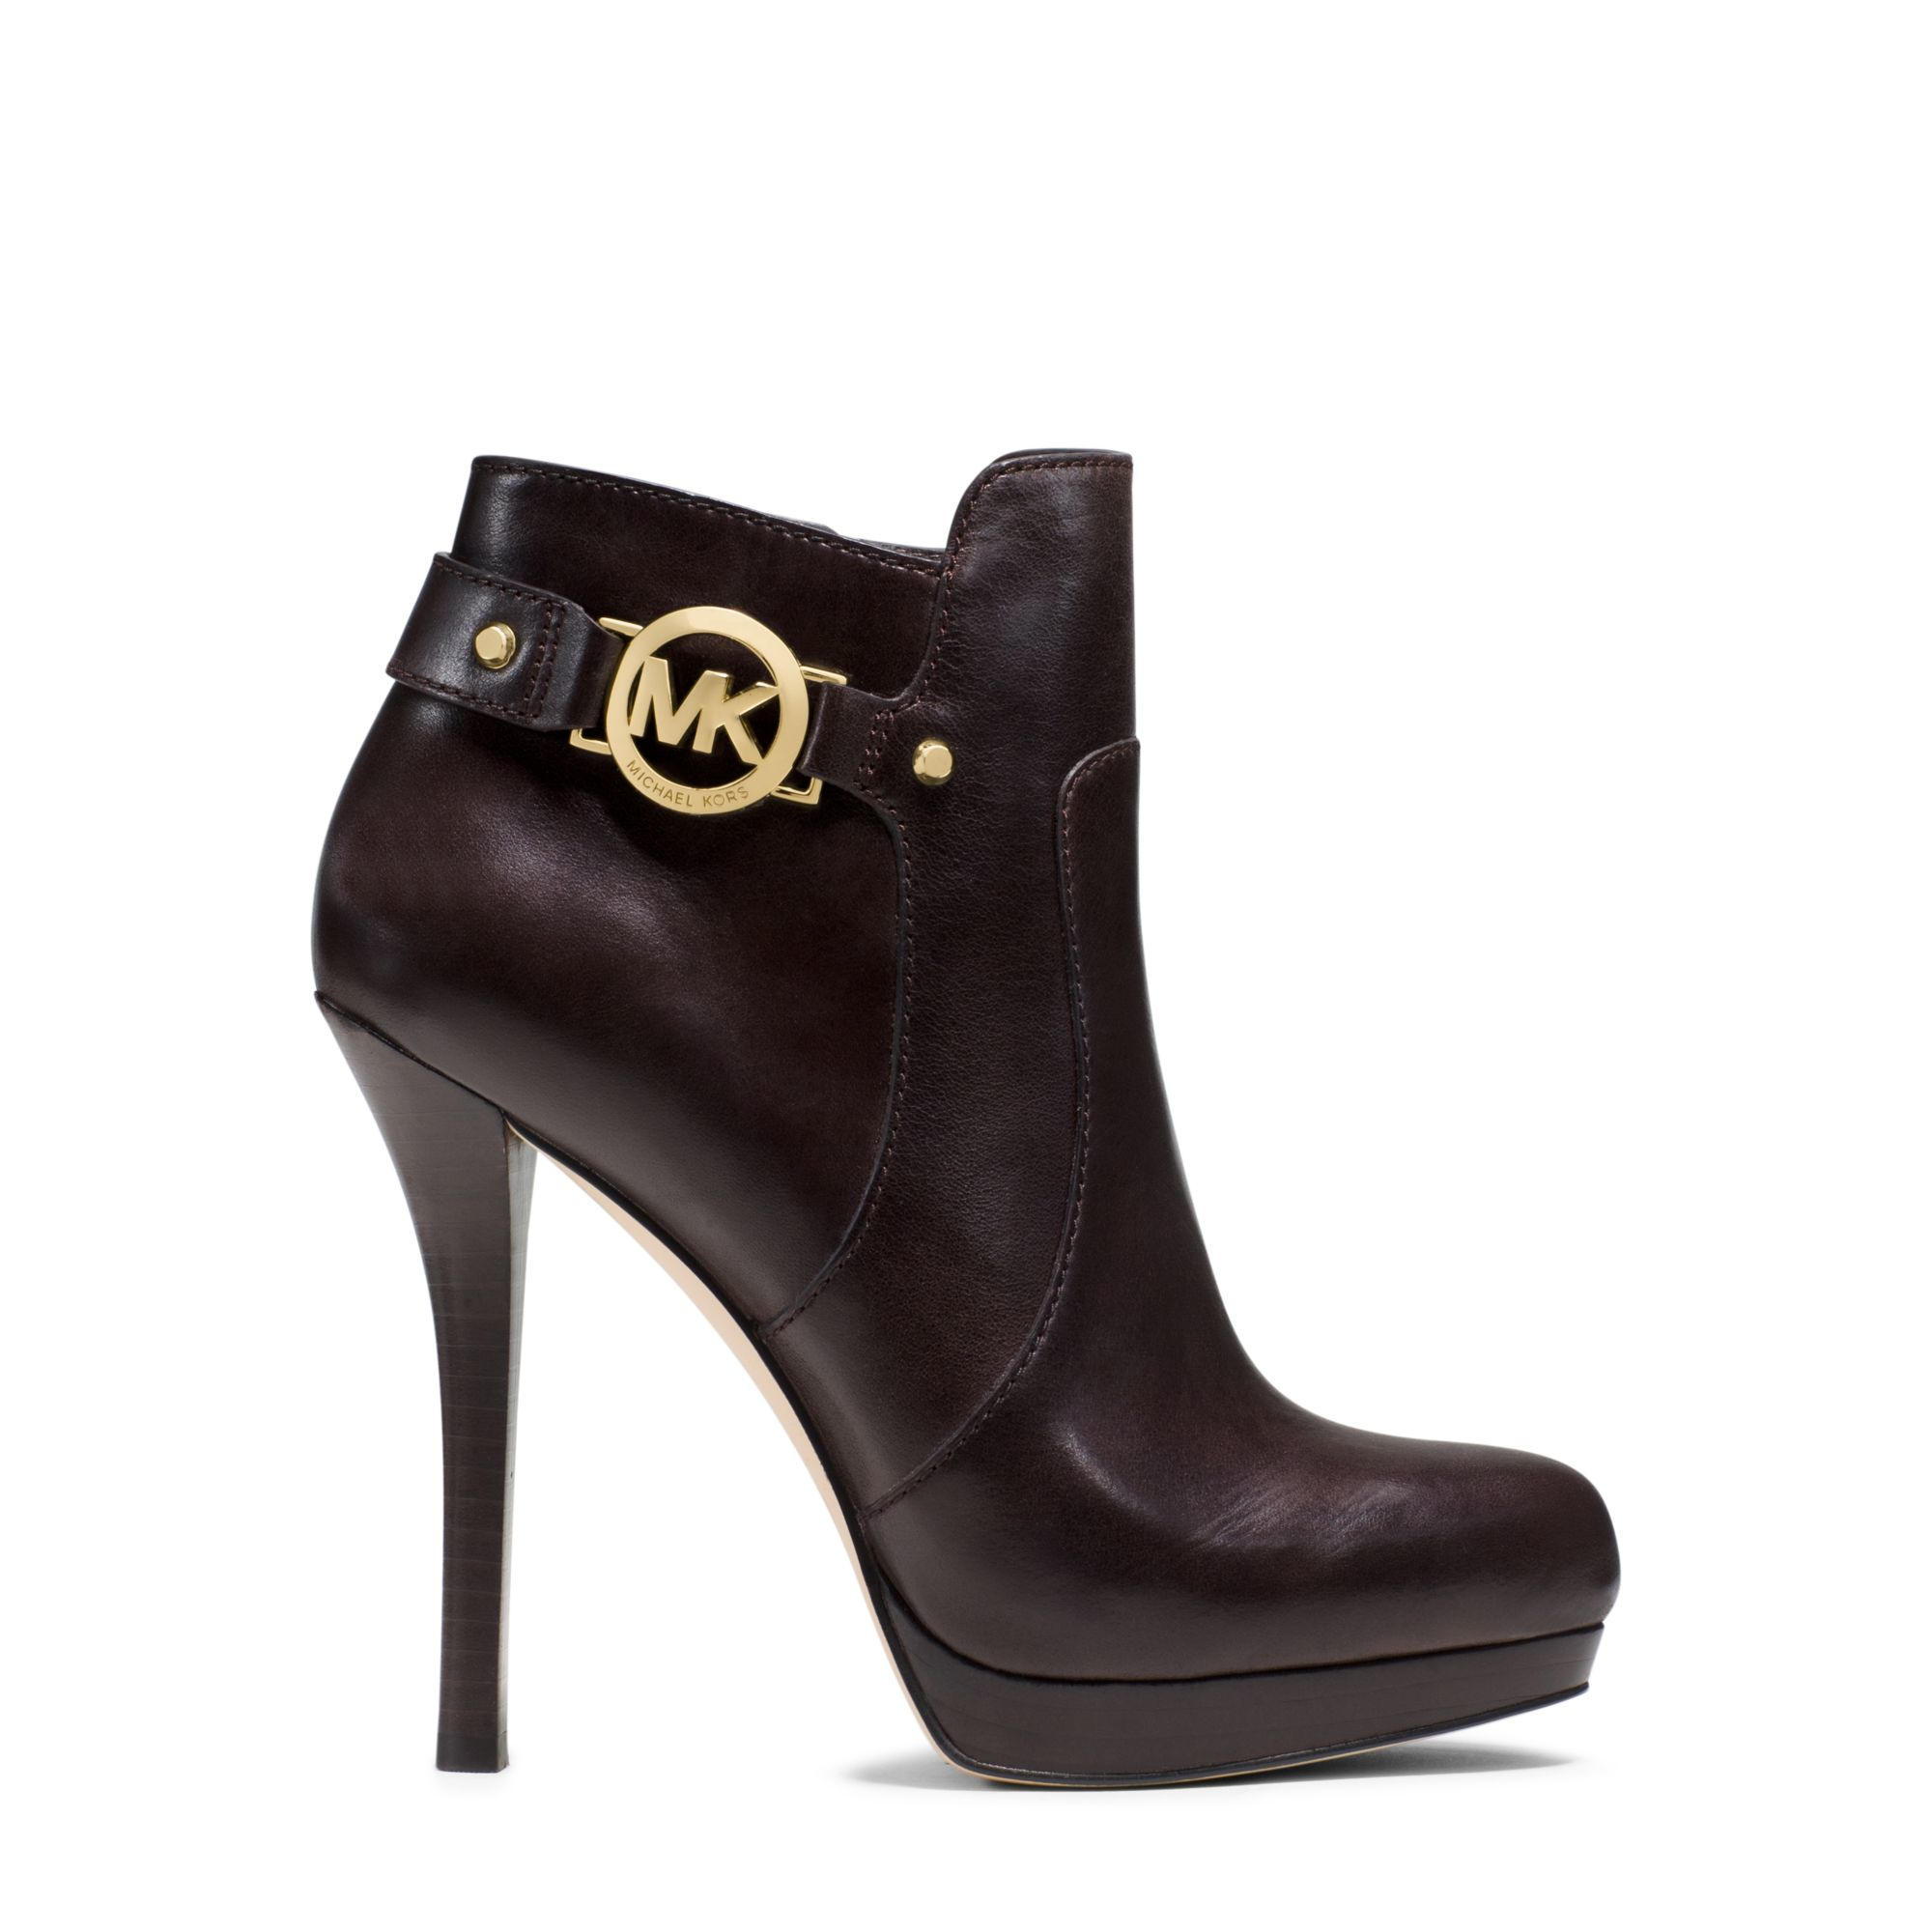 Michael kors Wyatt Leather Ankle Boot in Brown (CHOCOLATE) | Lyst